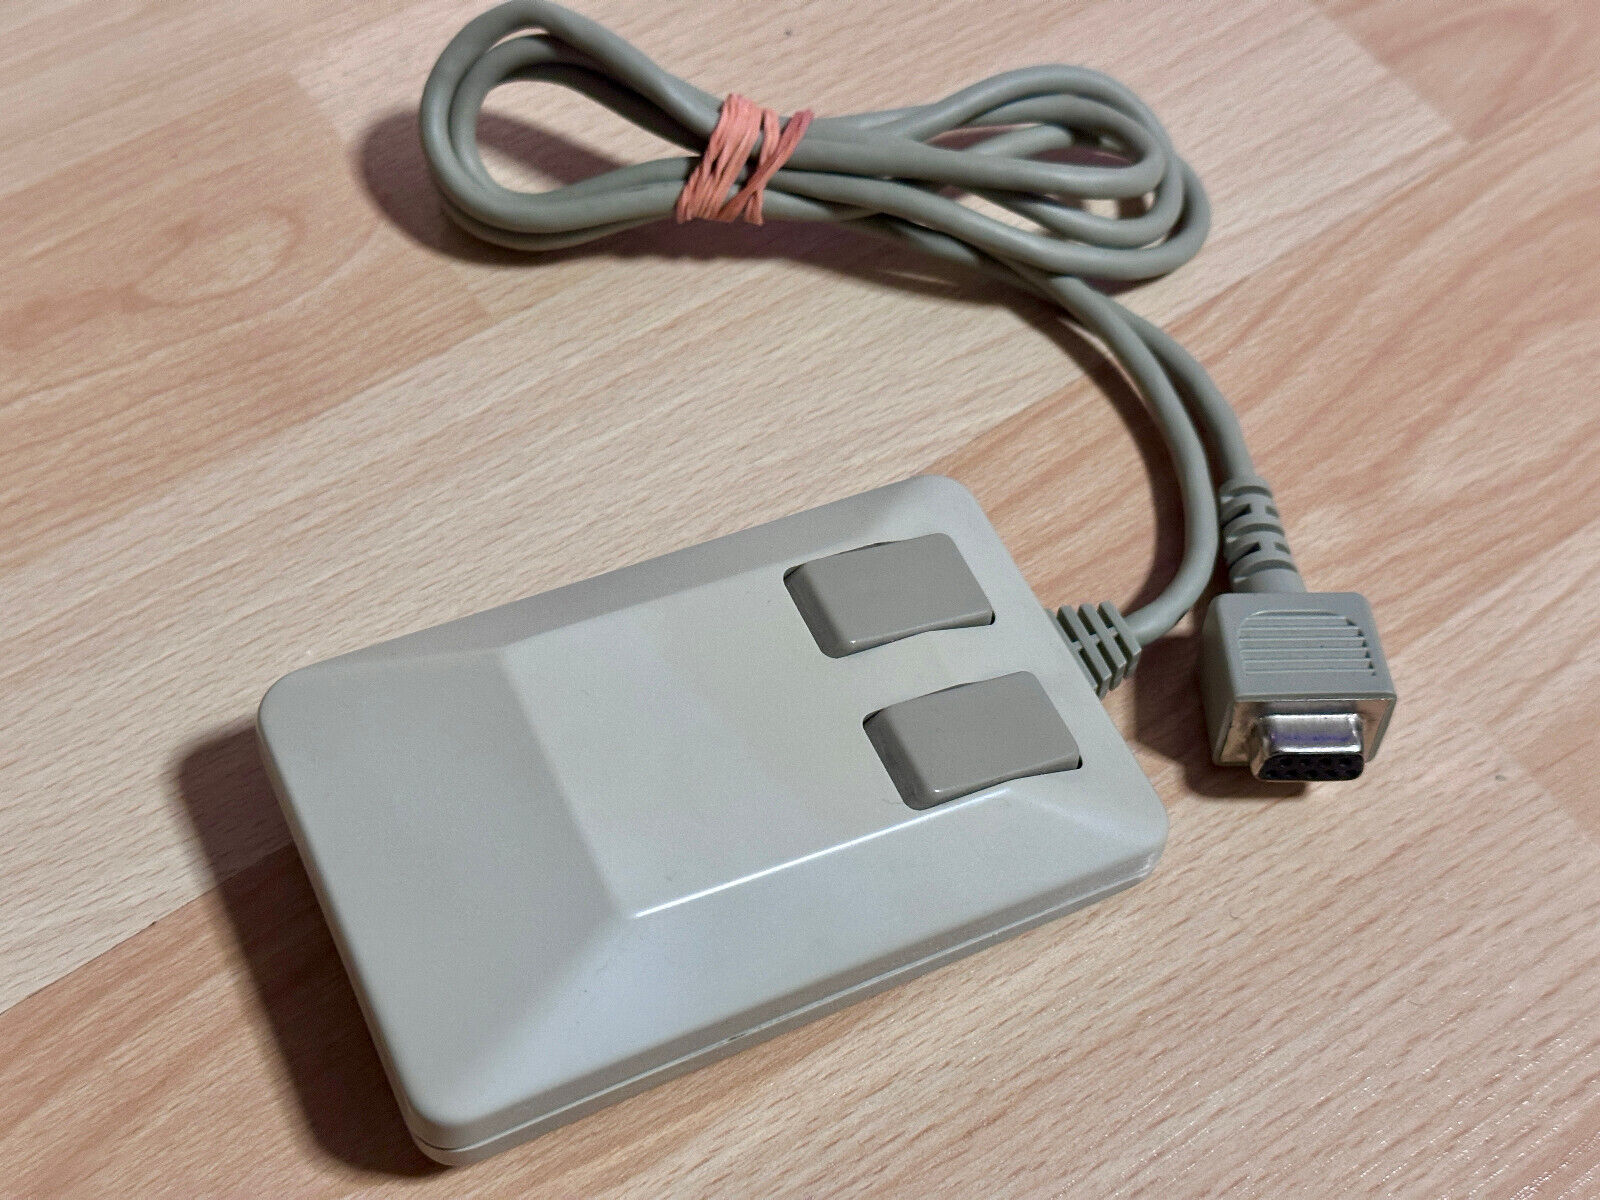 Commodore C64/C128 Mouse Model 1351, Top, Works